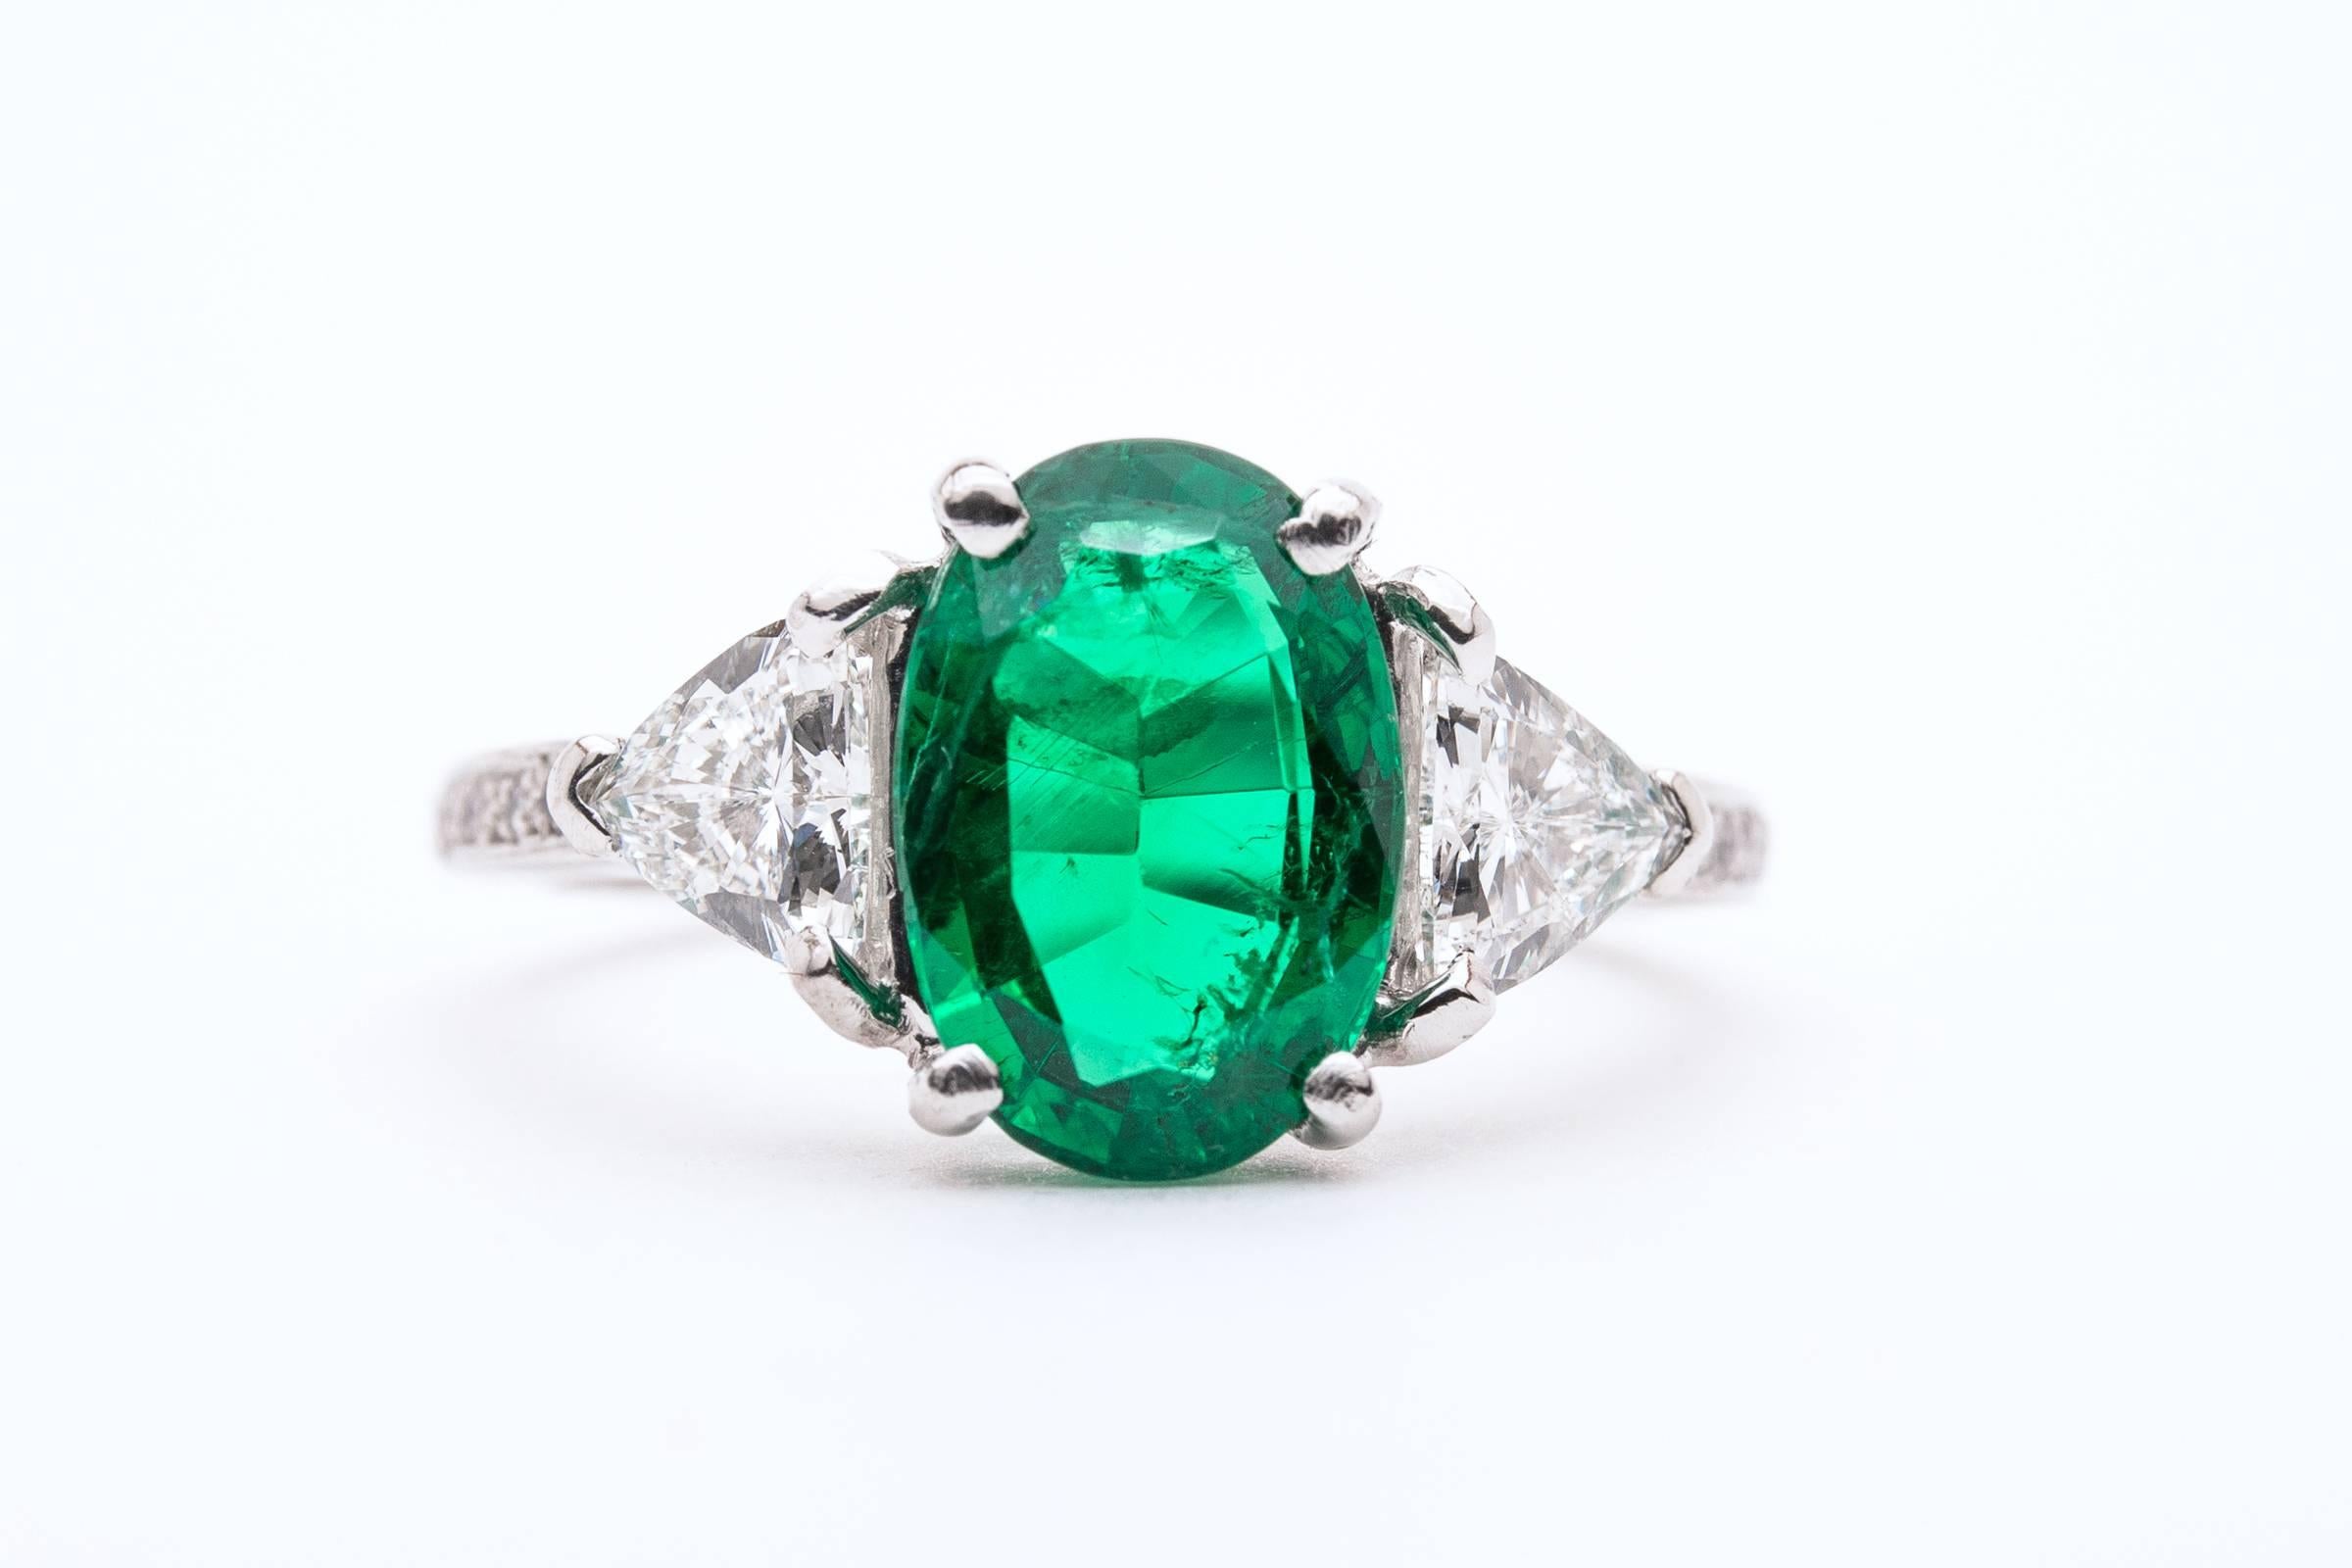 Beacon Hill Jewelers Presents:

On Sale for a limited time only! Was $9995 now $4995

A phenomenal quality emerald and diamond ring in platinum. Featuring a top quality oval cut emerald framed by trillion cut diamonds in platinum, this superb ring